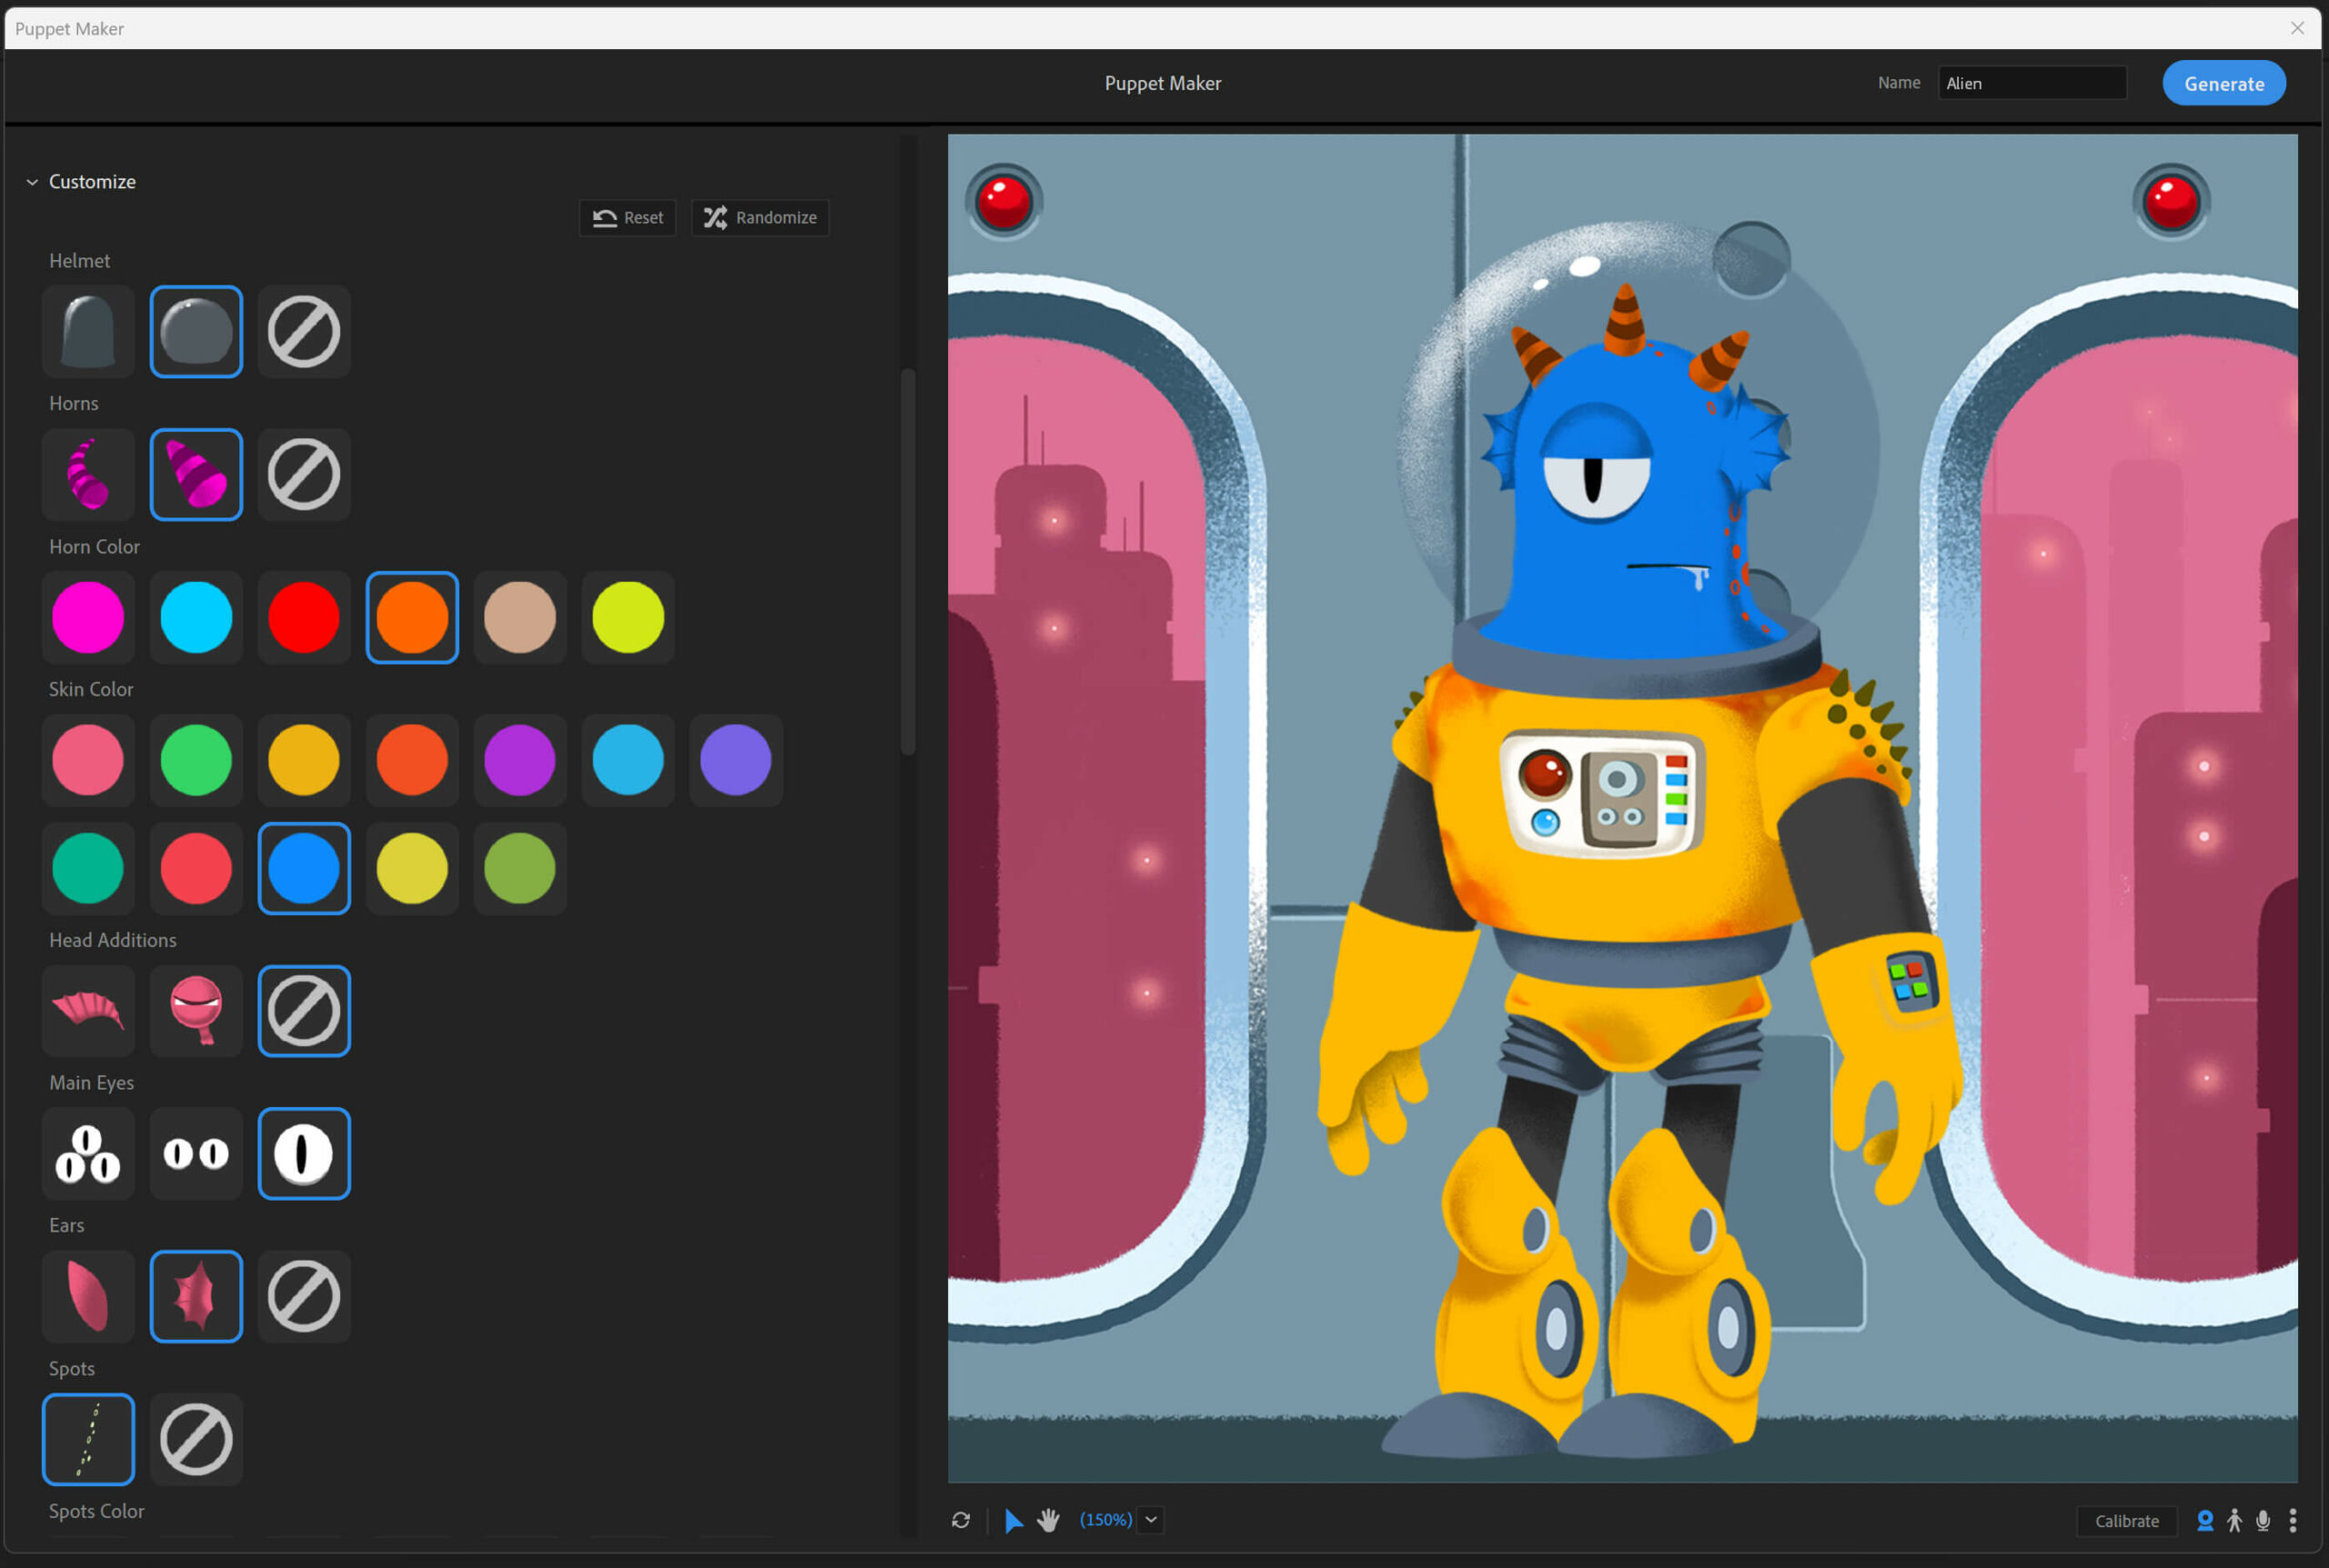 Customise your character with Puppet Maker